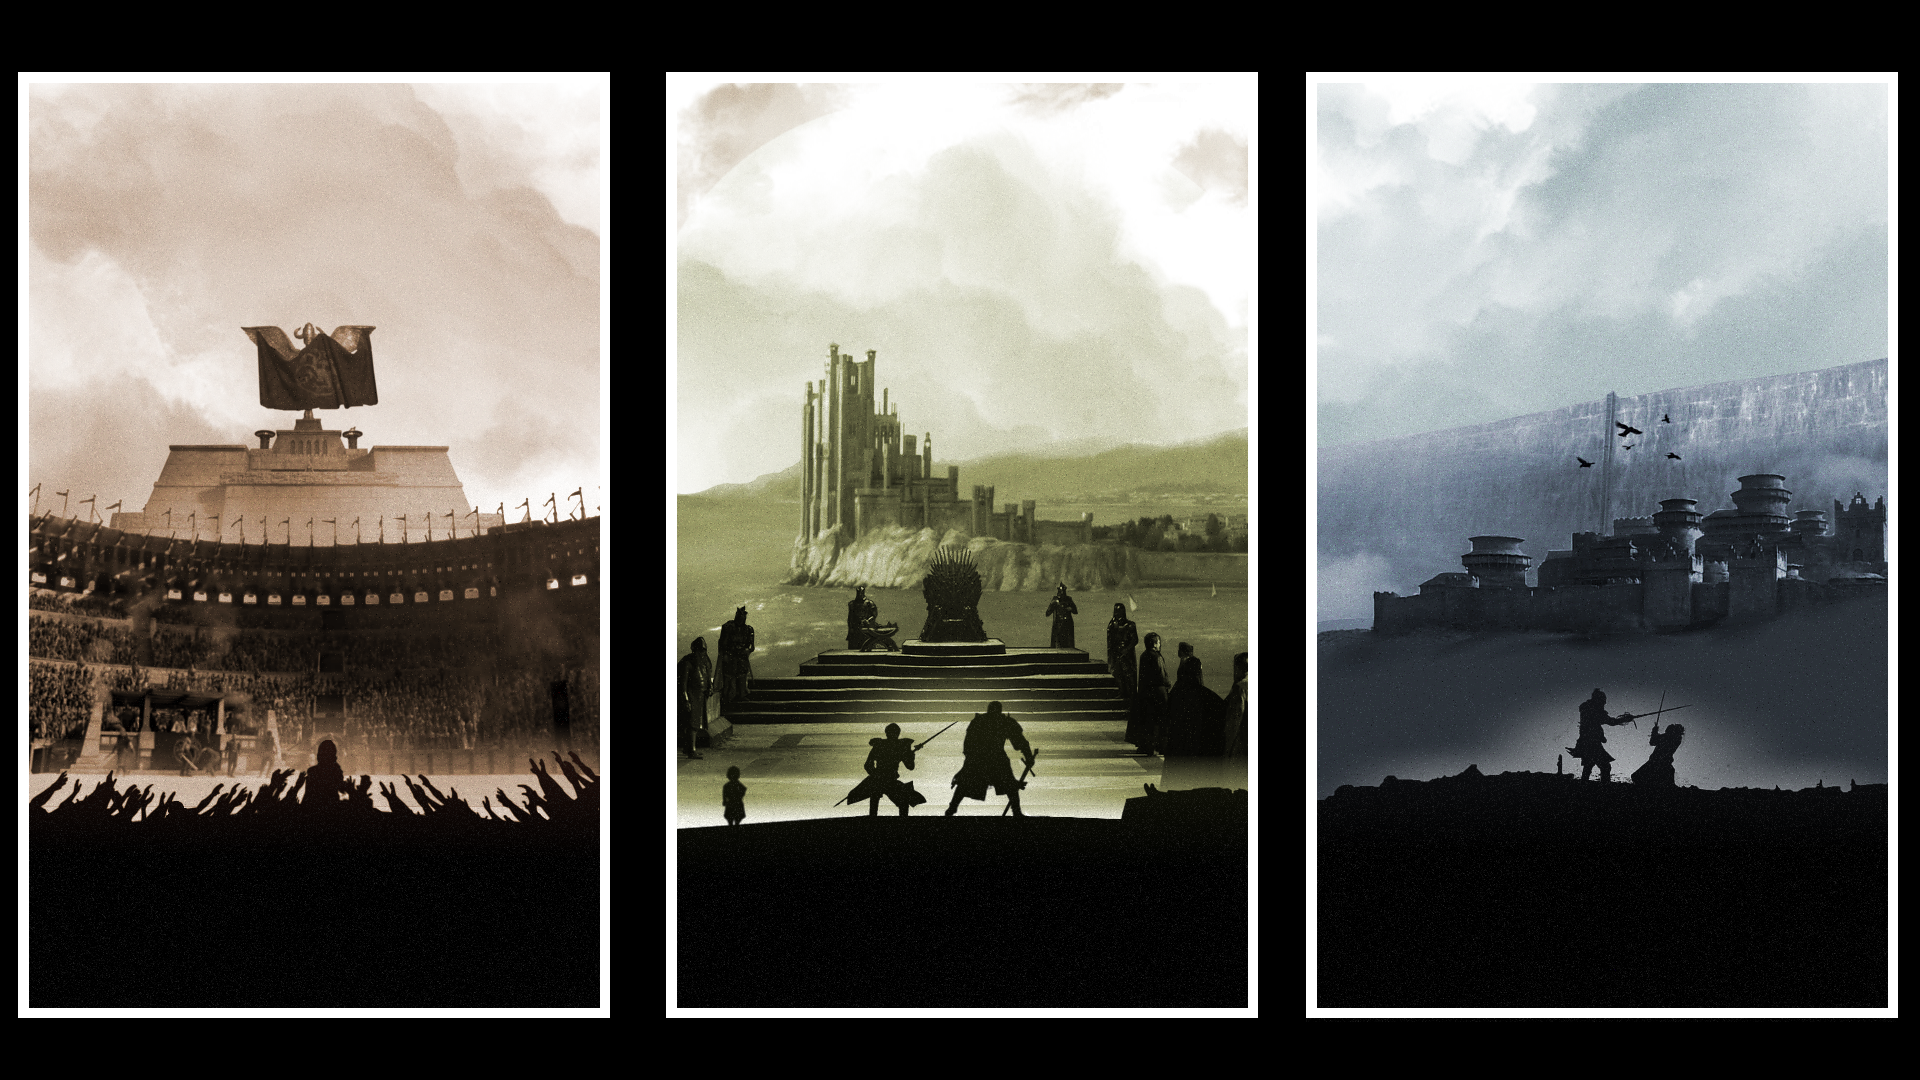 Gameofthrones - Winterfell Wallpaper Android , HD Wallpaper & Backgrounds